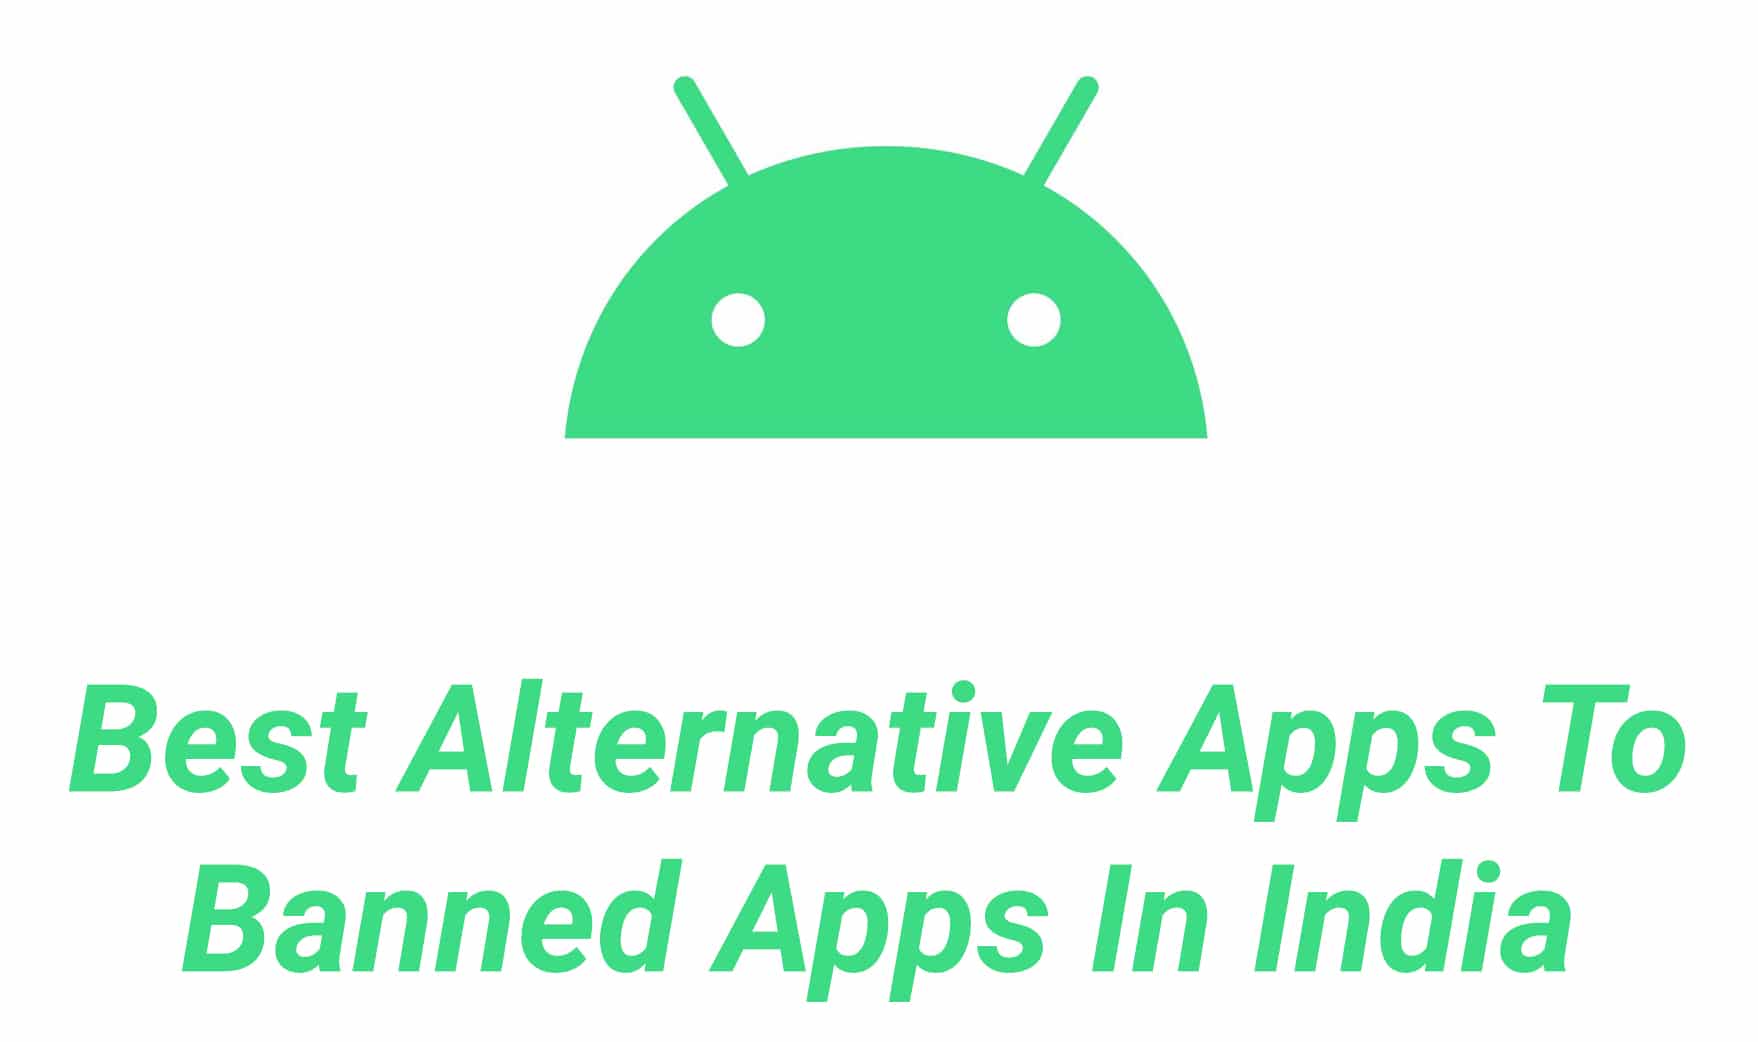 Best Alternative Apps To Banned Apps In India